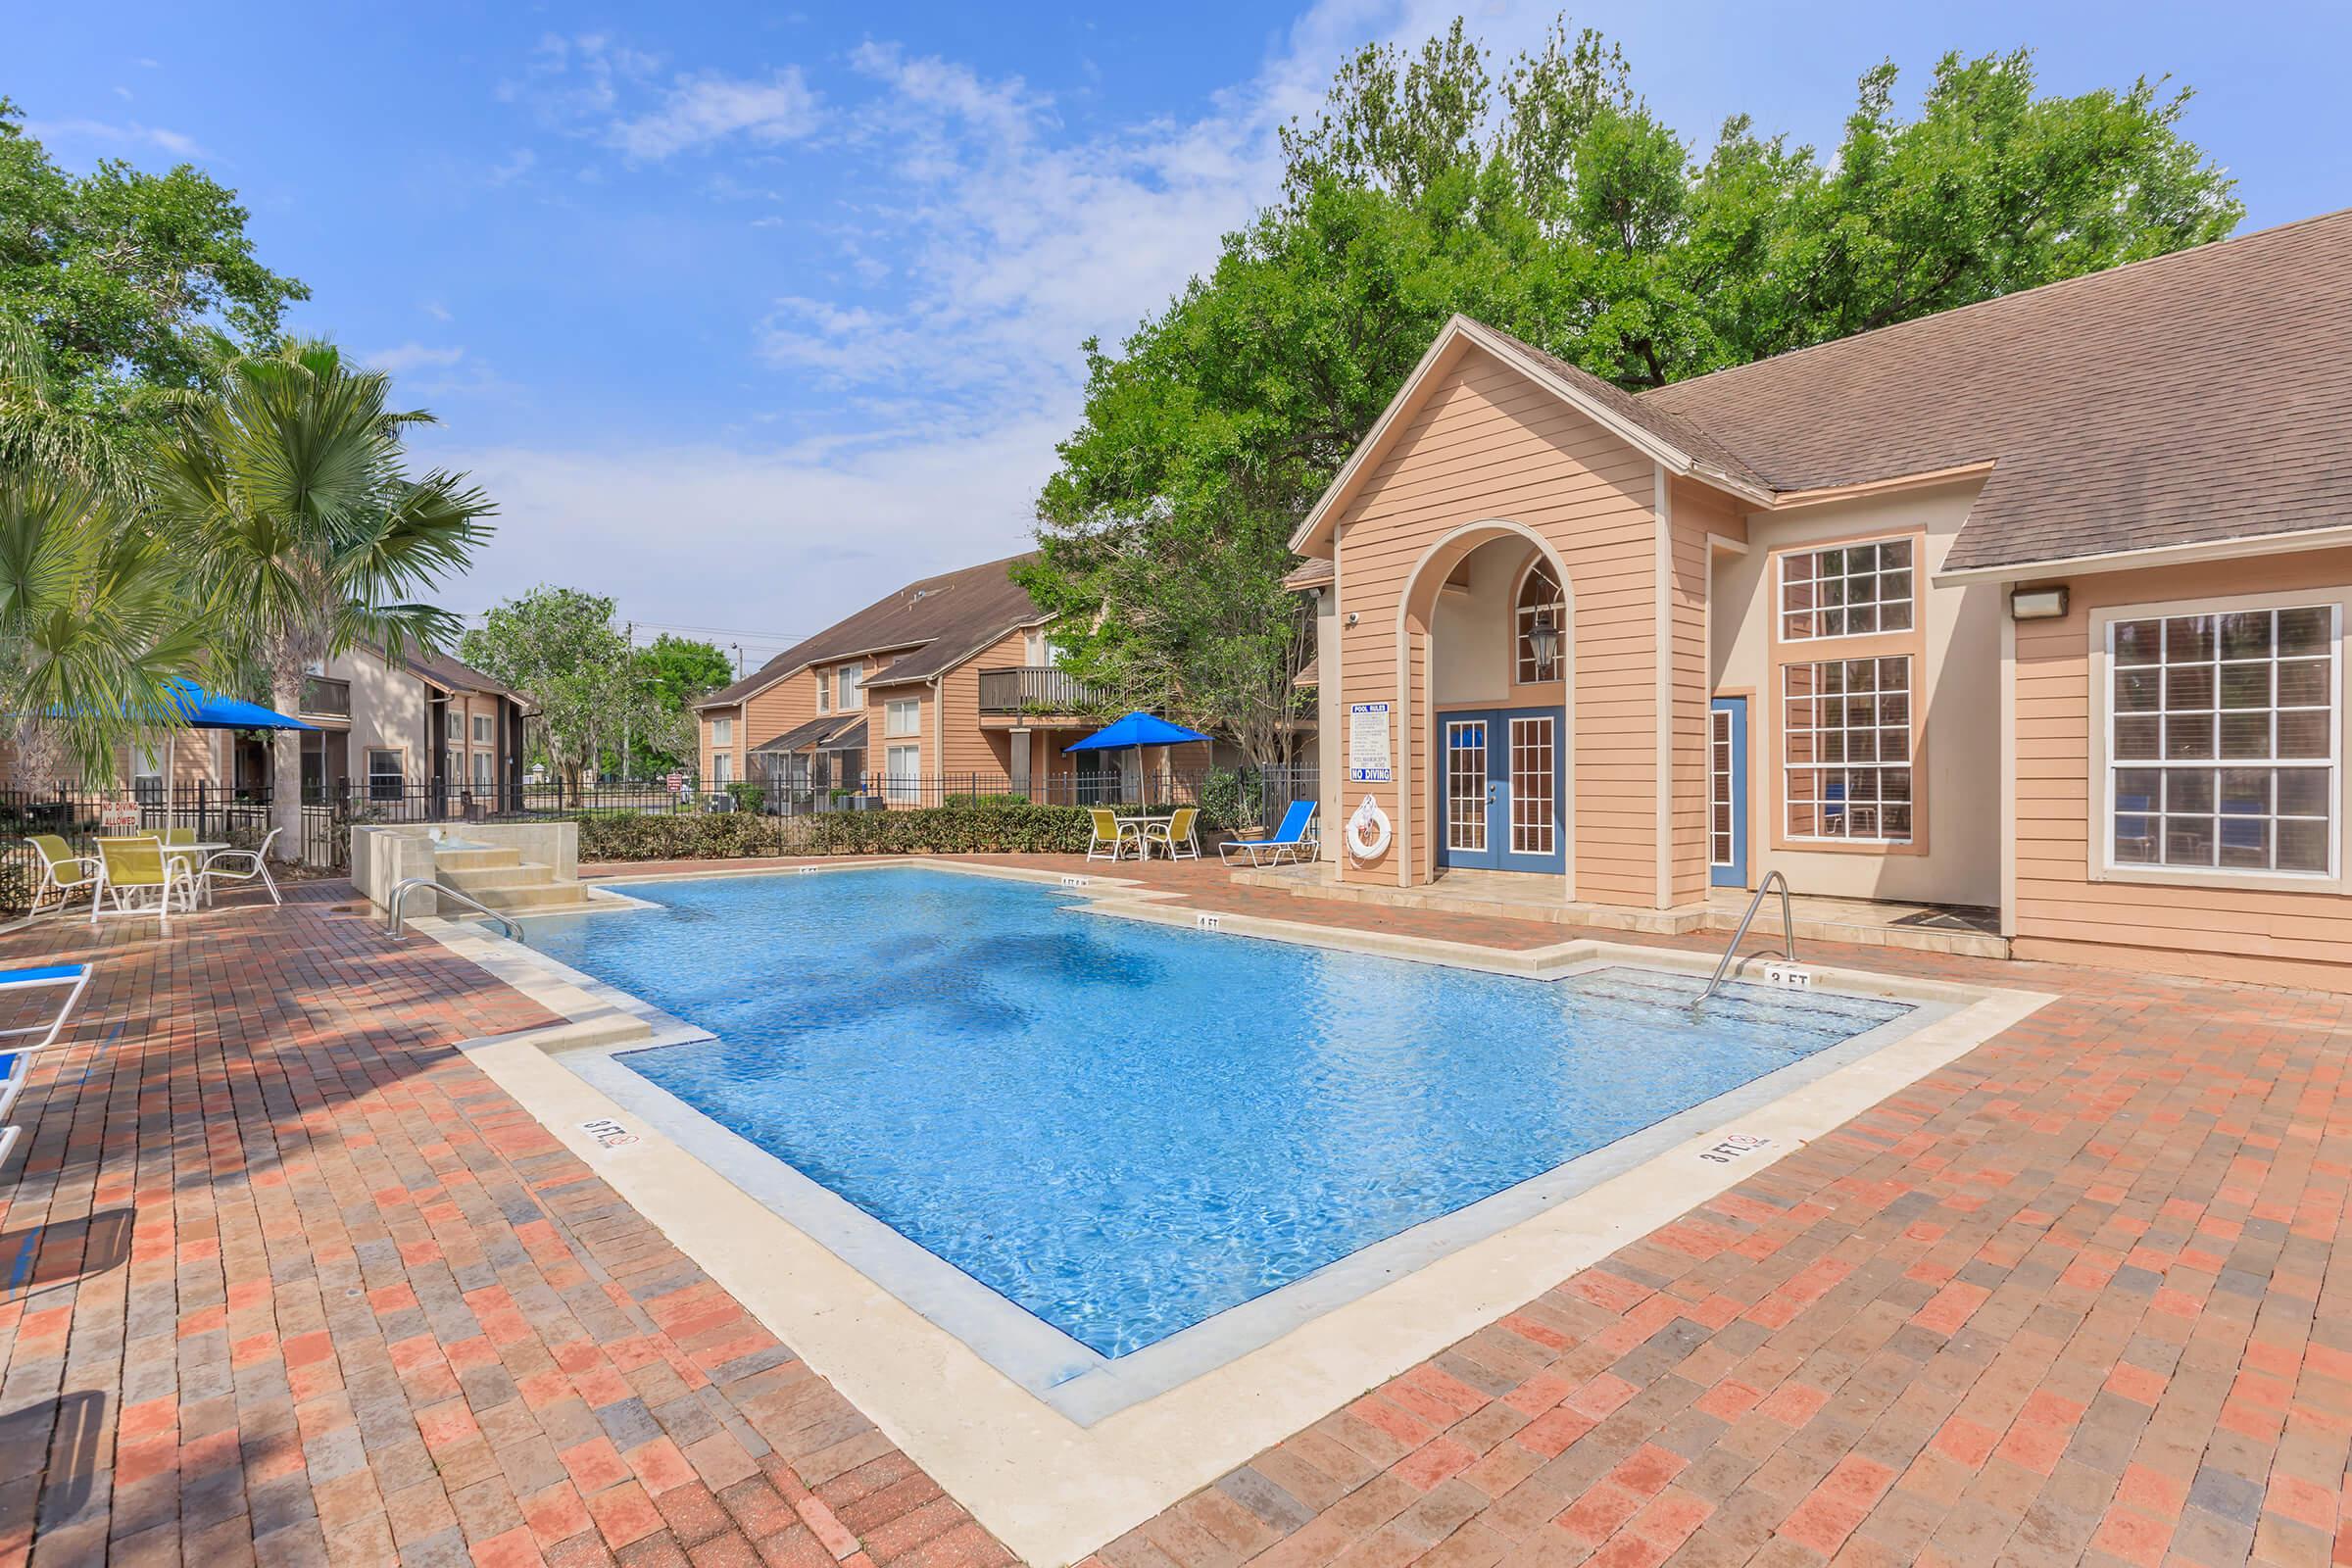 a large brick building with a pool in front of a house